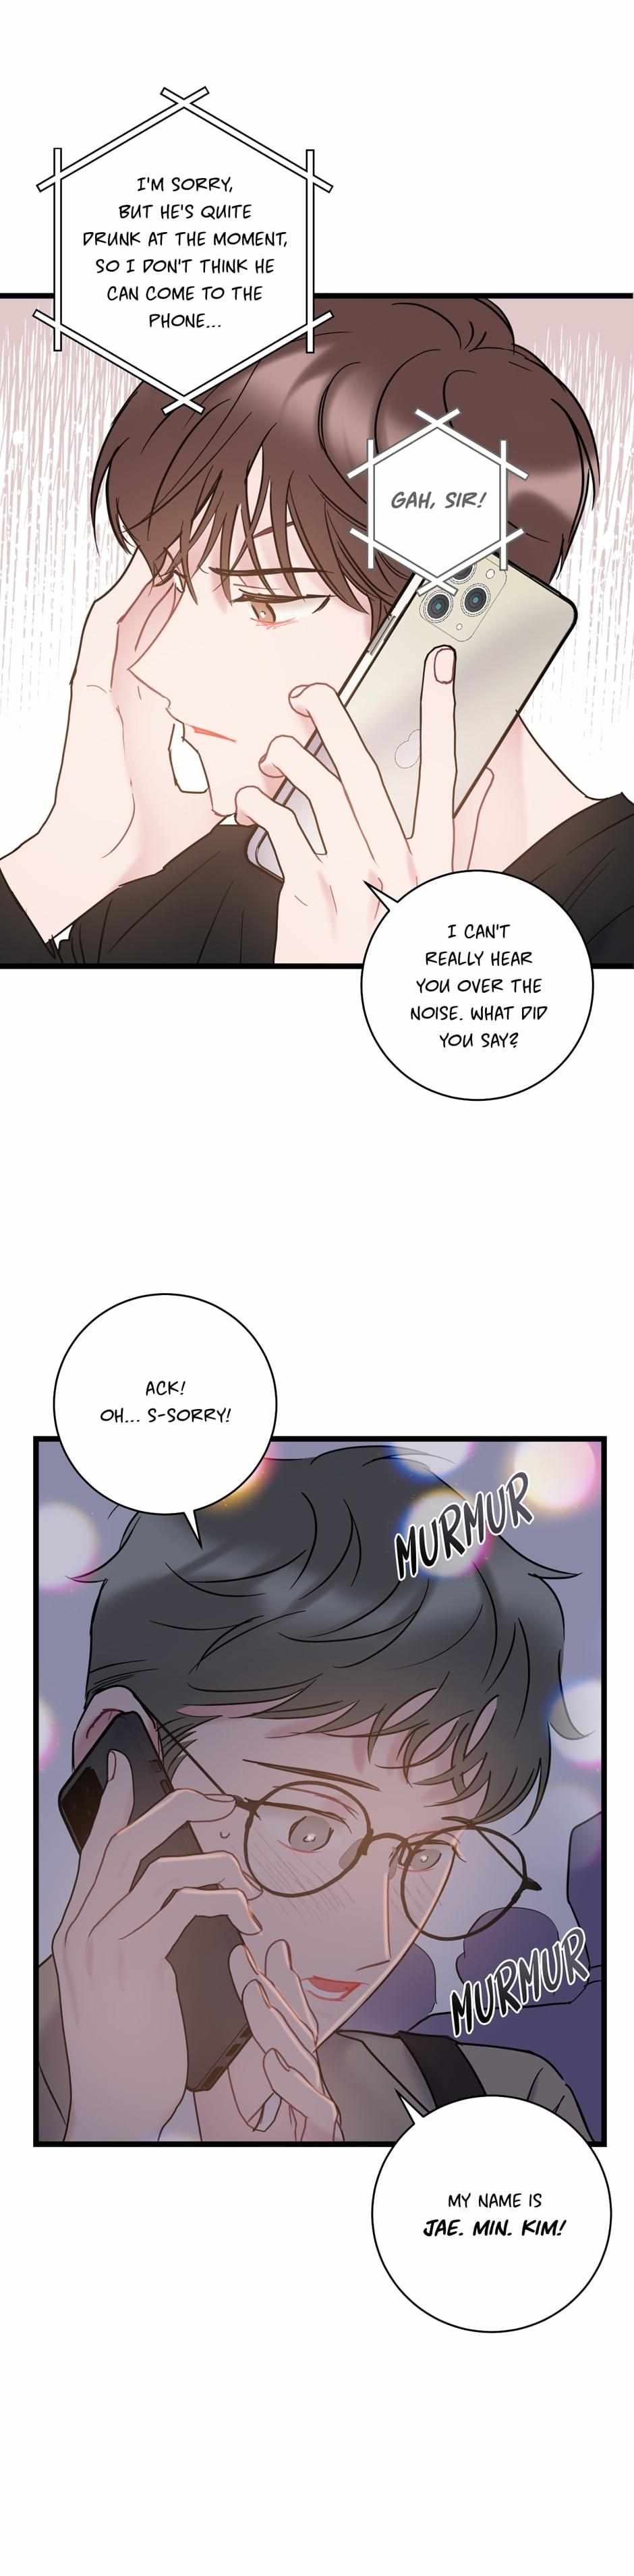 The Most Ordinary Relationship - Page 3